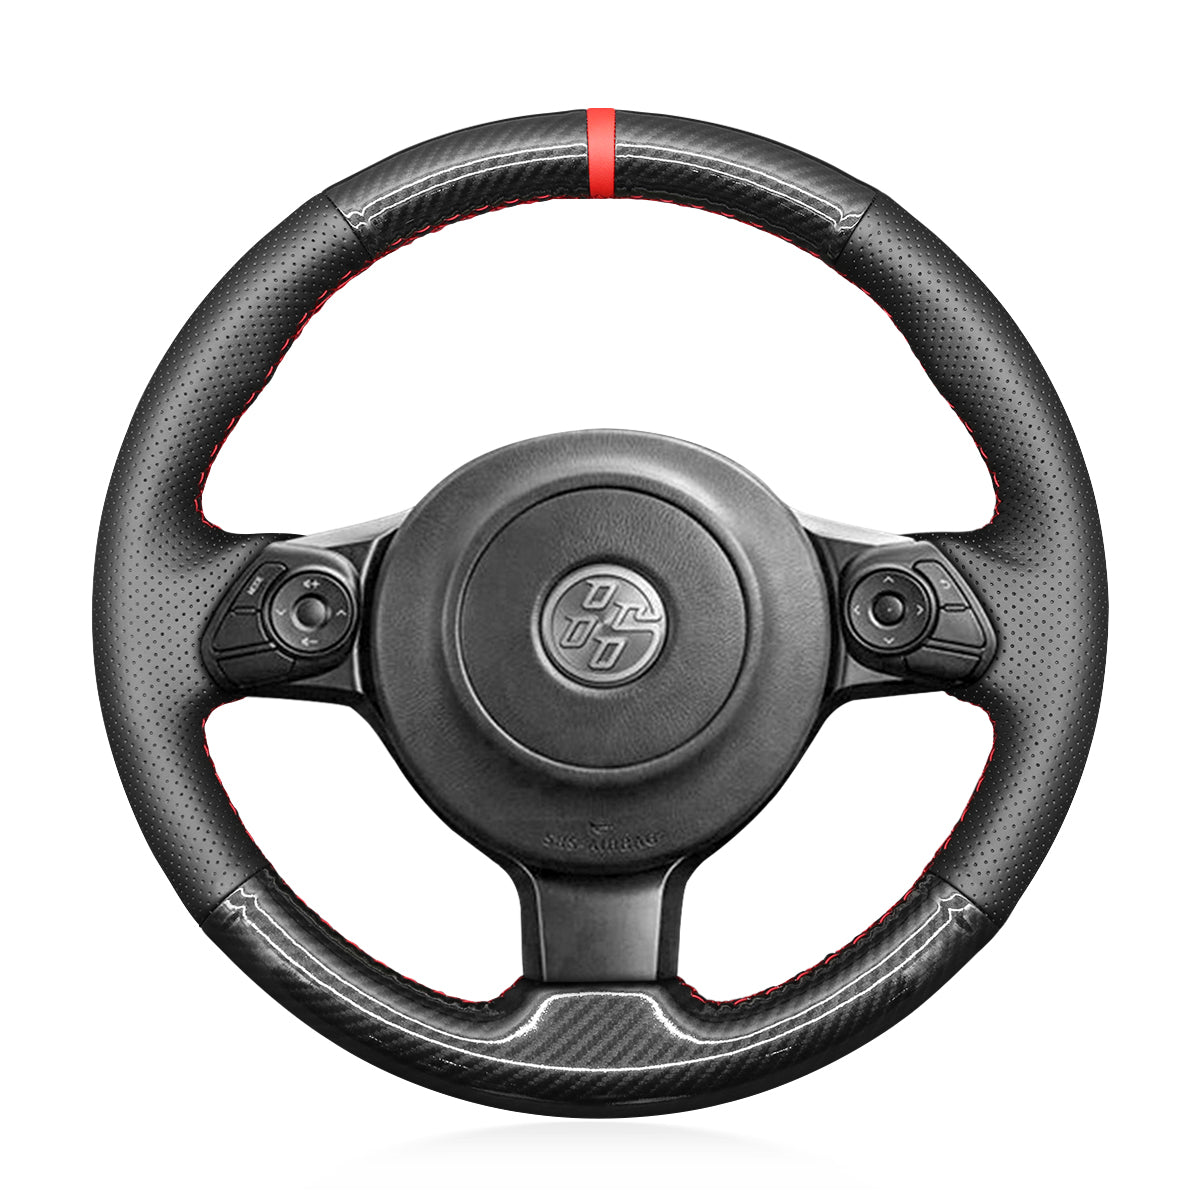 MEWANT Leather Suede Carbon Fiber Car Steering Wheel Cover for